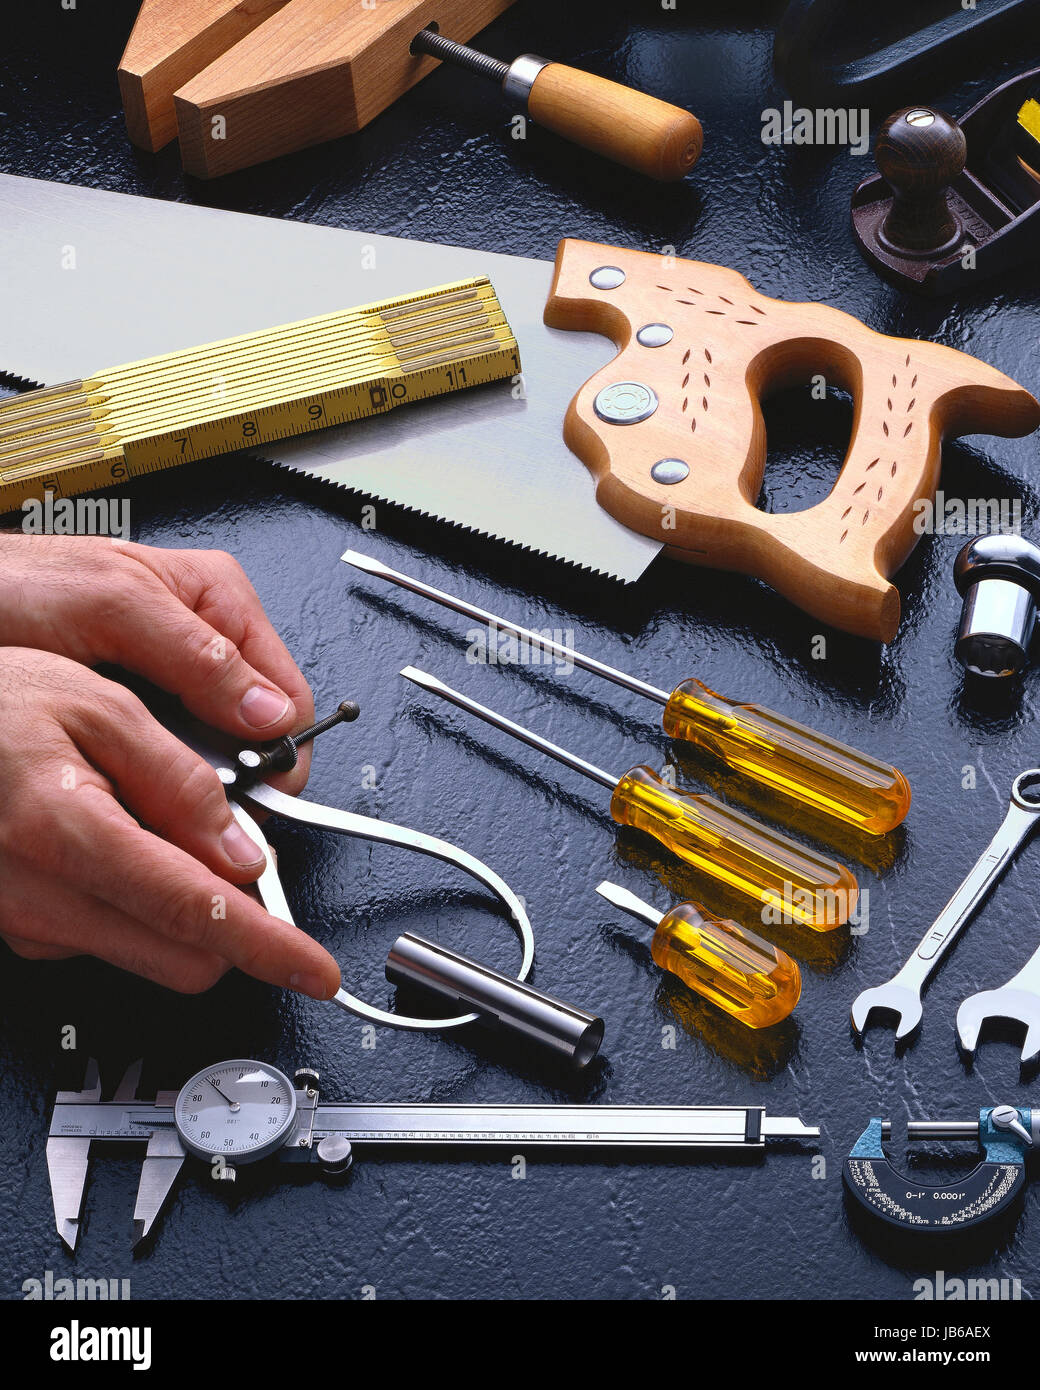 Hand Tools With a Pair of Hands Stock Photo